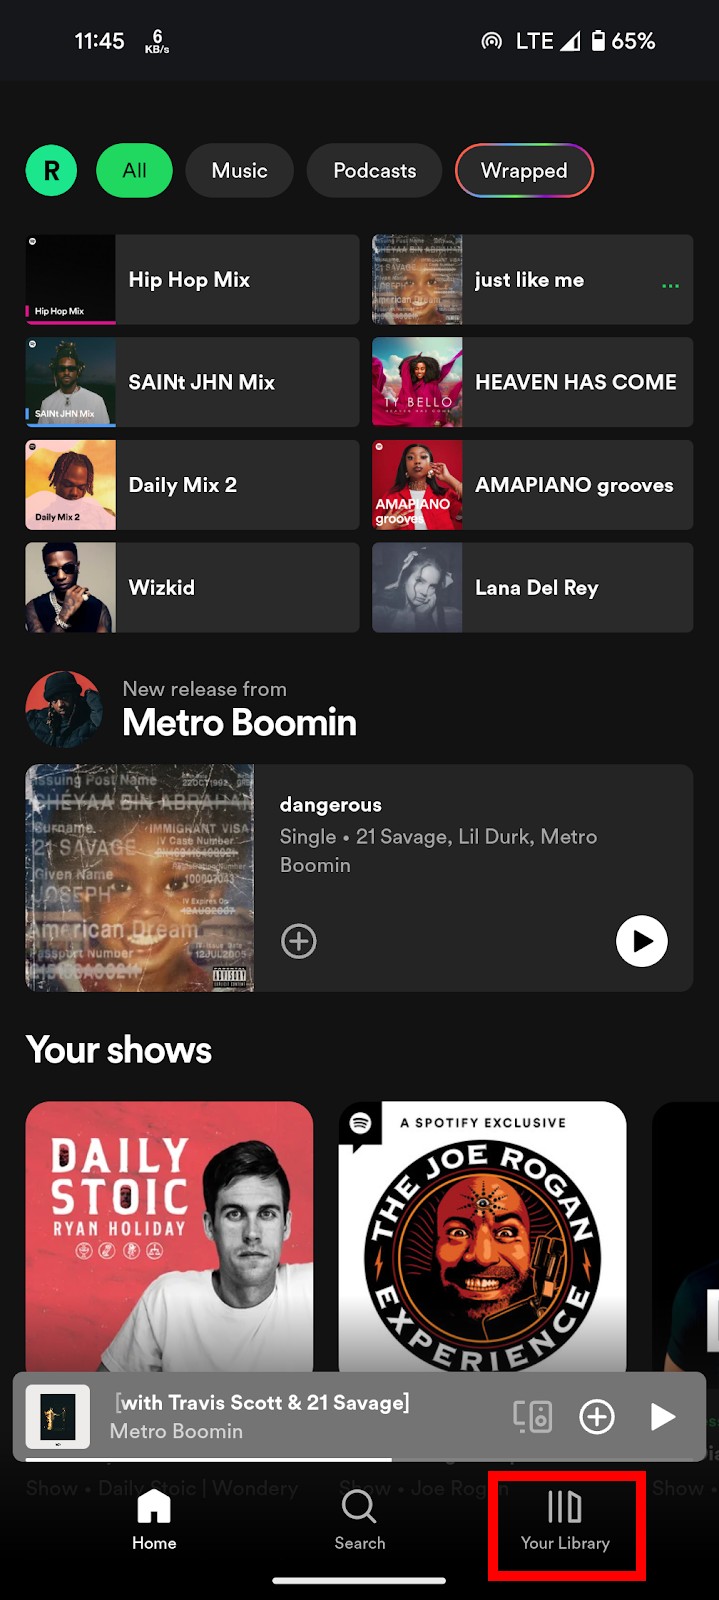 Spotify mobile app home page with "Your playlist" highlighted